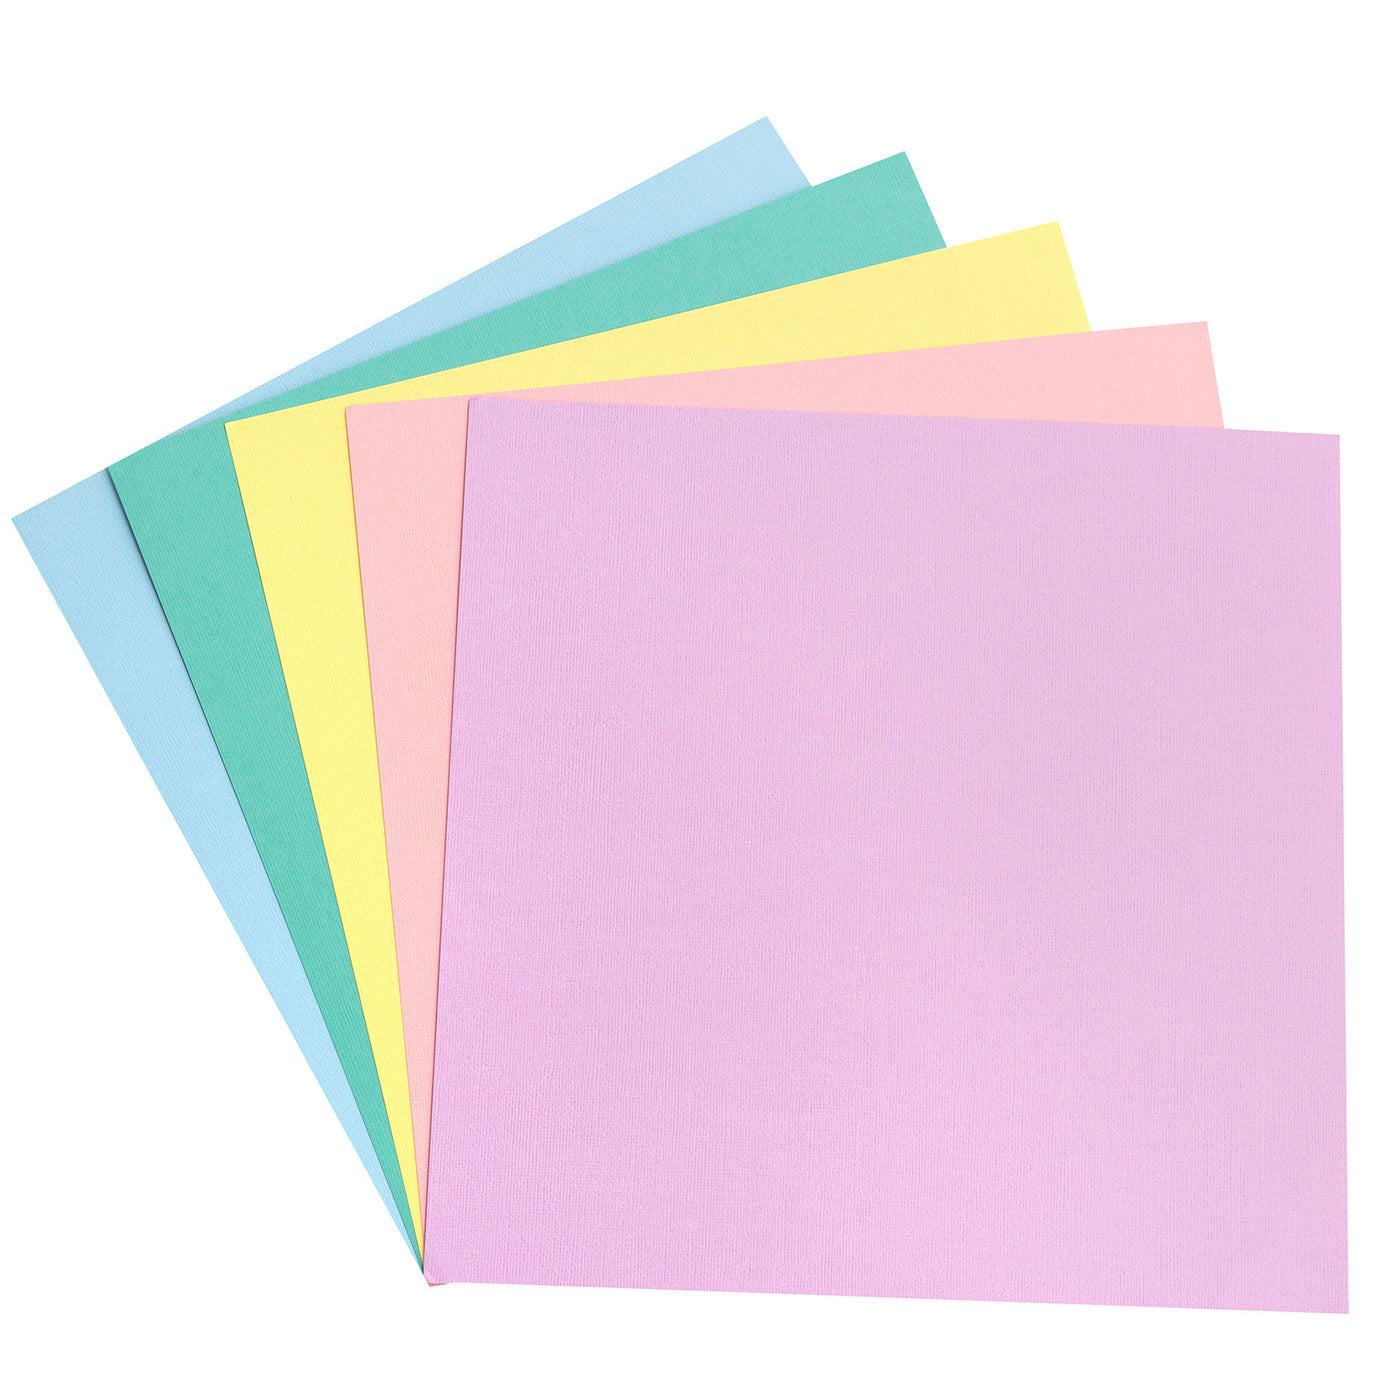 Create and Craft Pearlescent 12x12 Cardstock Pad - Bright Burst